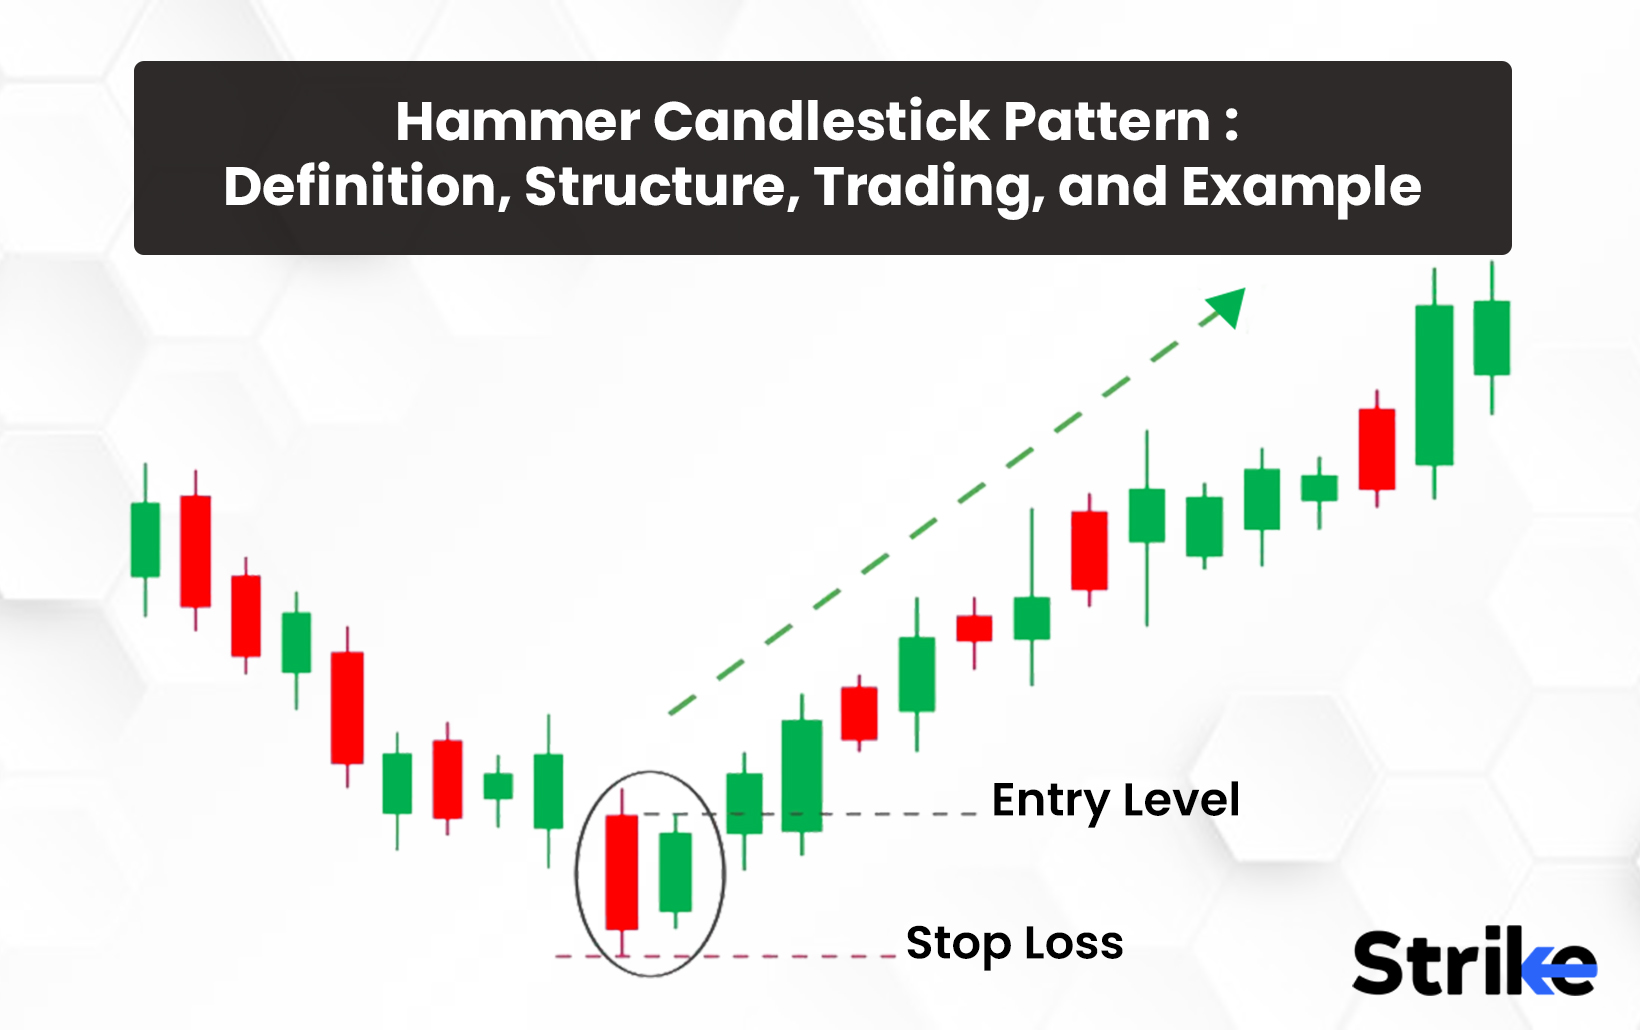 Hammer Candlestick Pattern: Definition, Structure, Trading, and Example